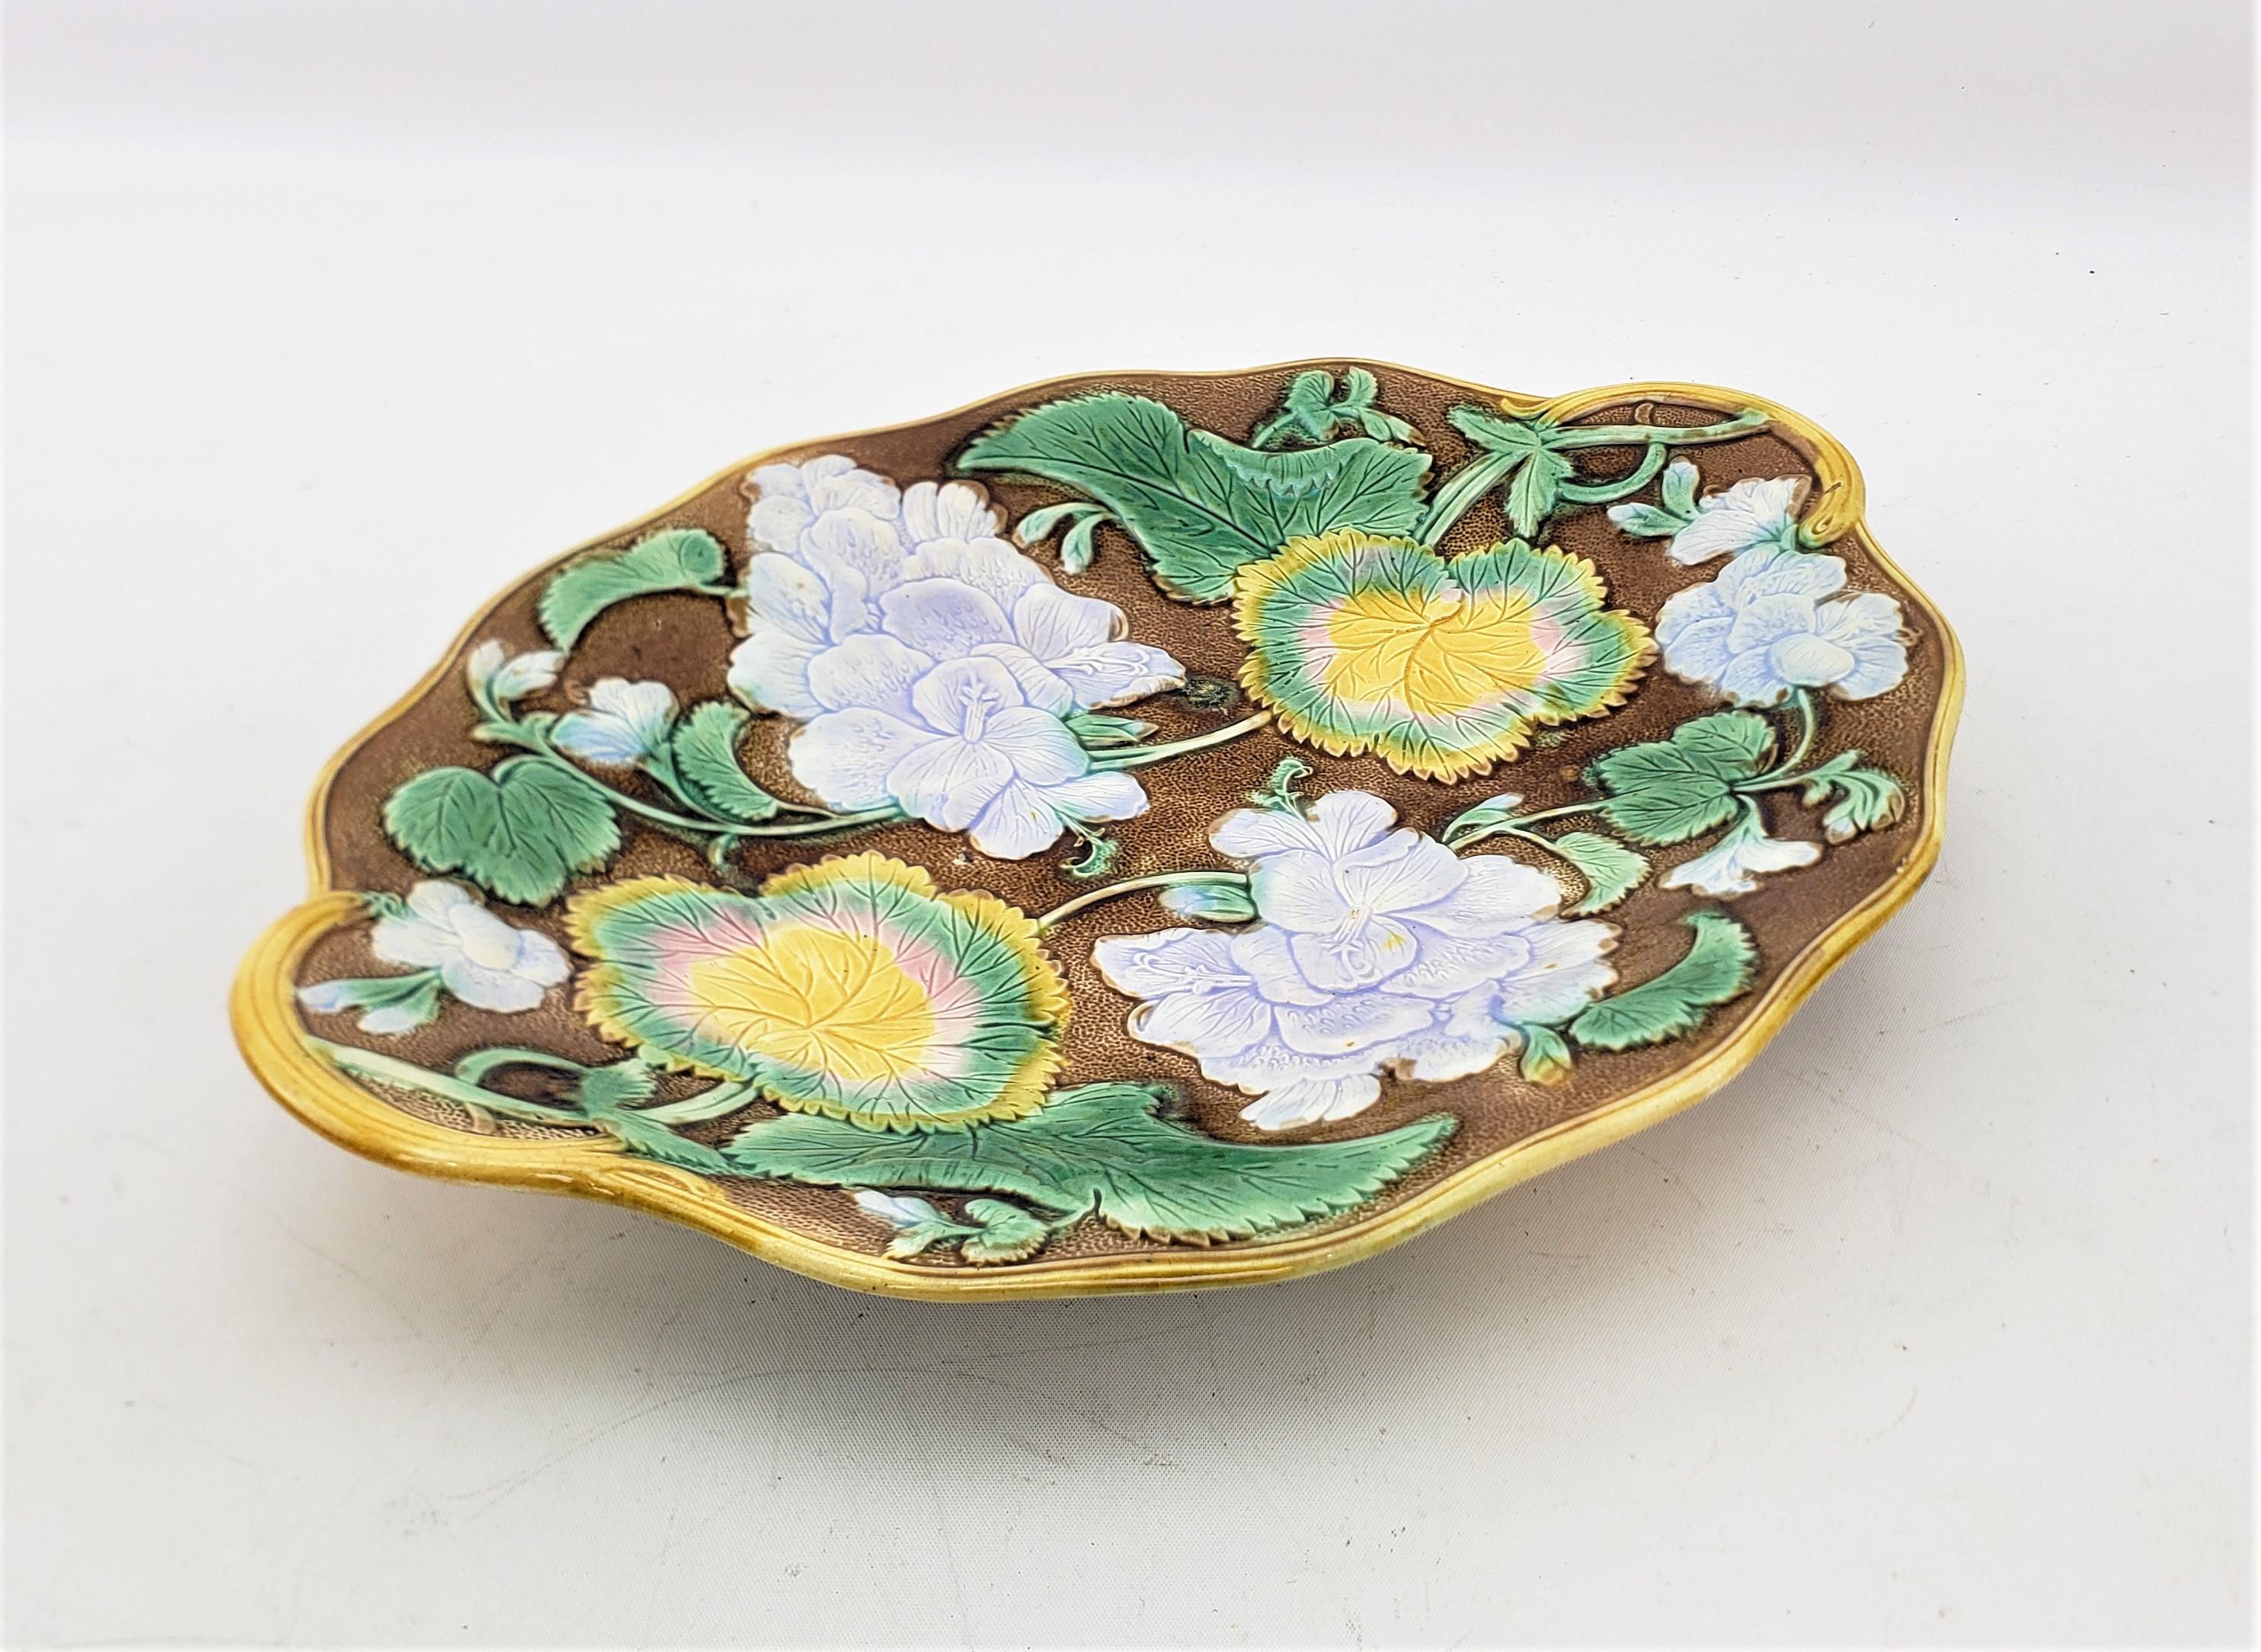 Small Antique Majolica Serving Dish or Platter with Leaf & Flower Decoration In Good Condition For Sale In Hamilton, Ontario